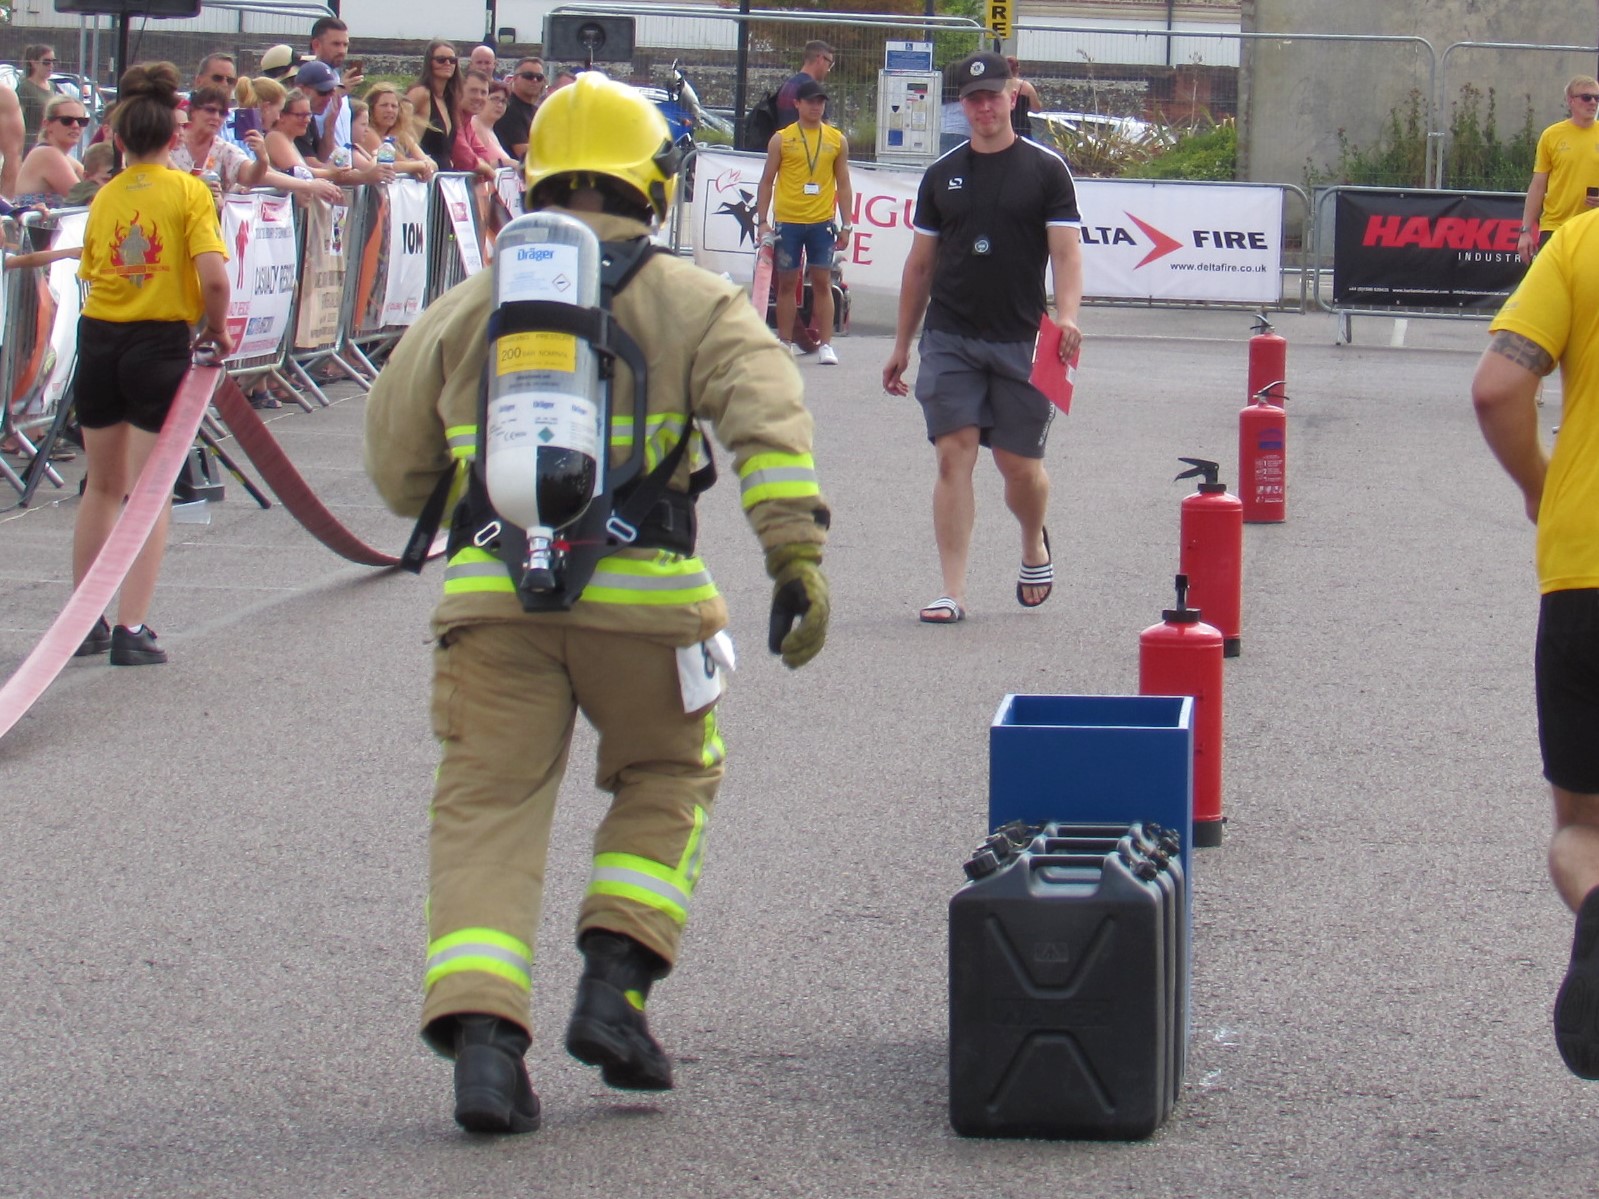 Participants in the British Firefighter Challenge 2018